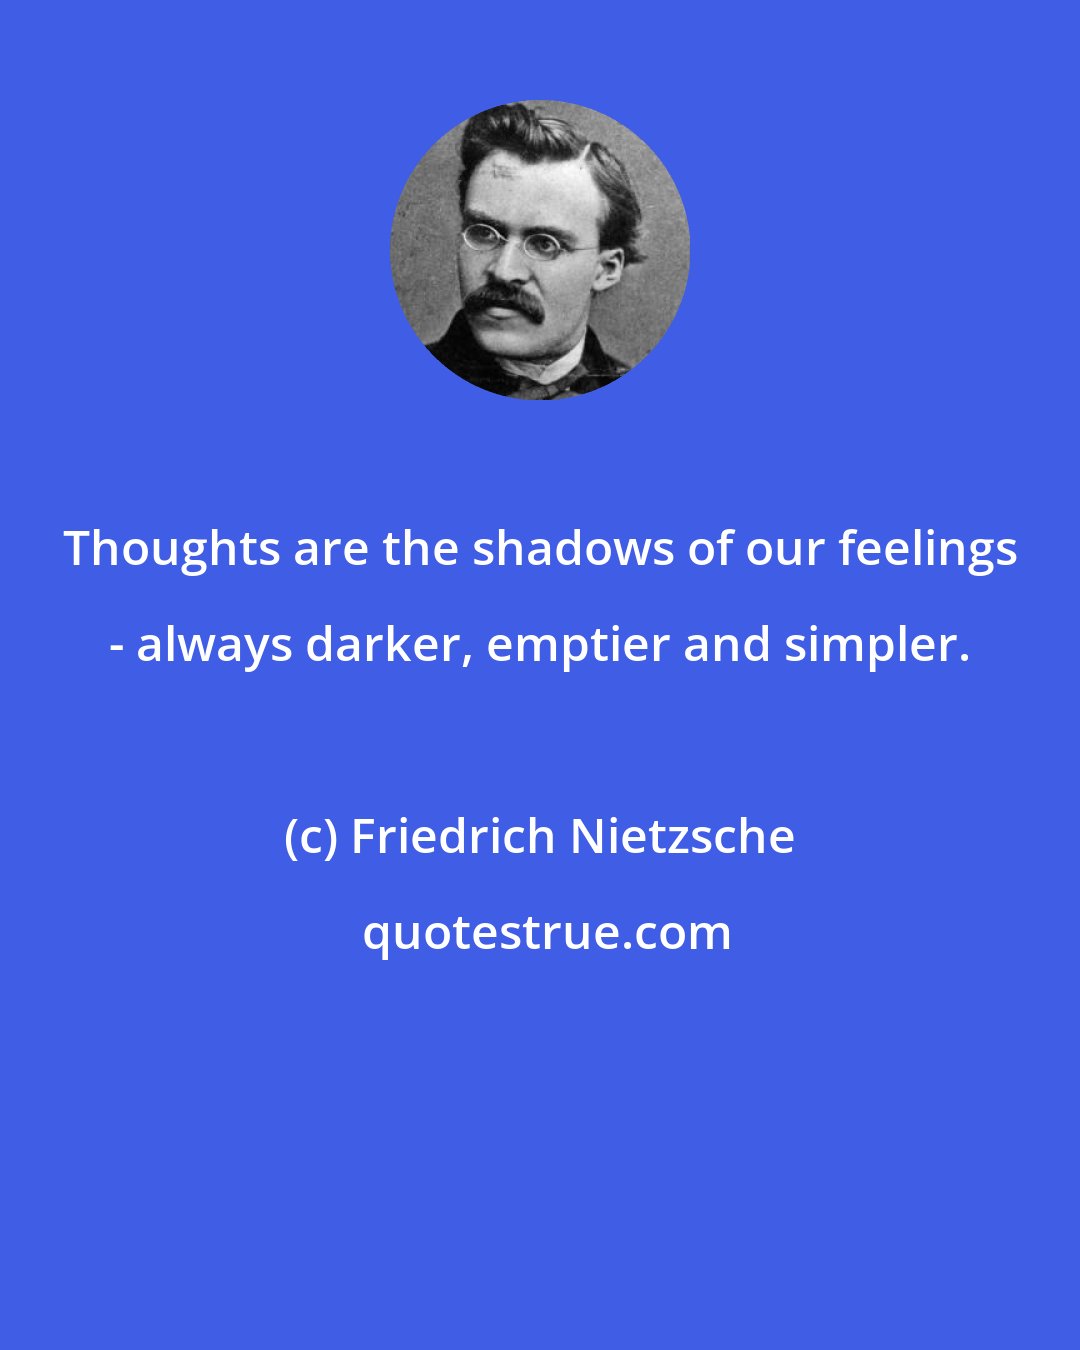 Friedrich Nietzsche: Thoughts are the shadows of our feelings - always darker, emptier and simpler.